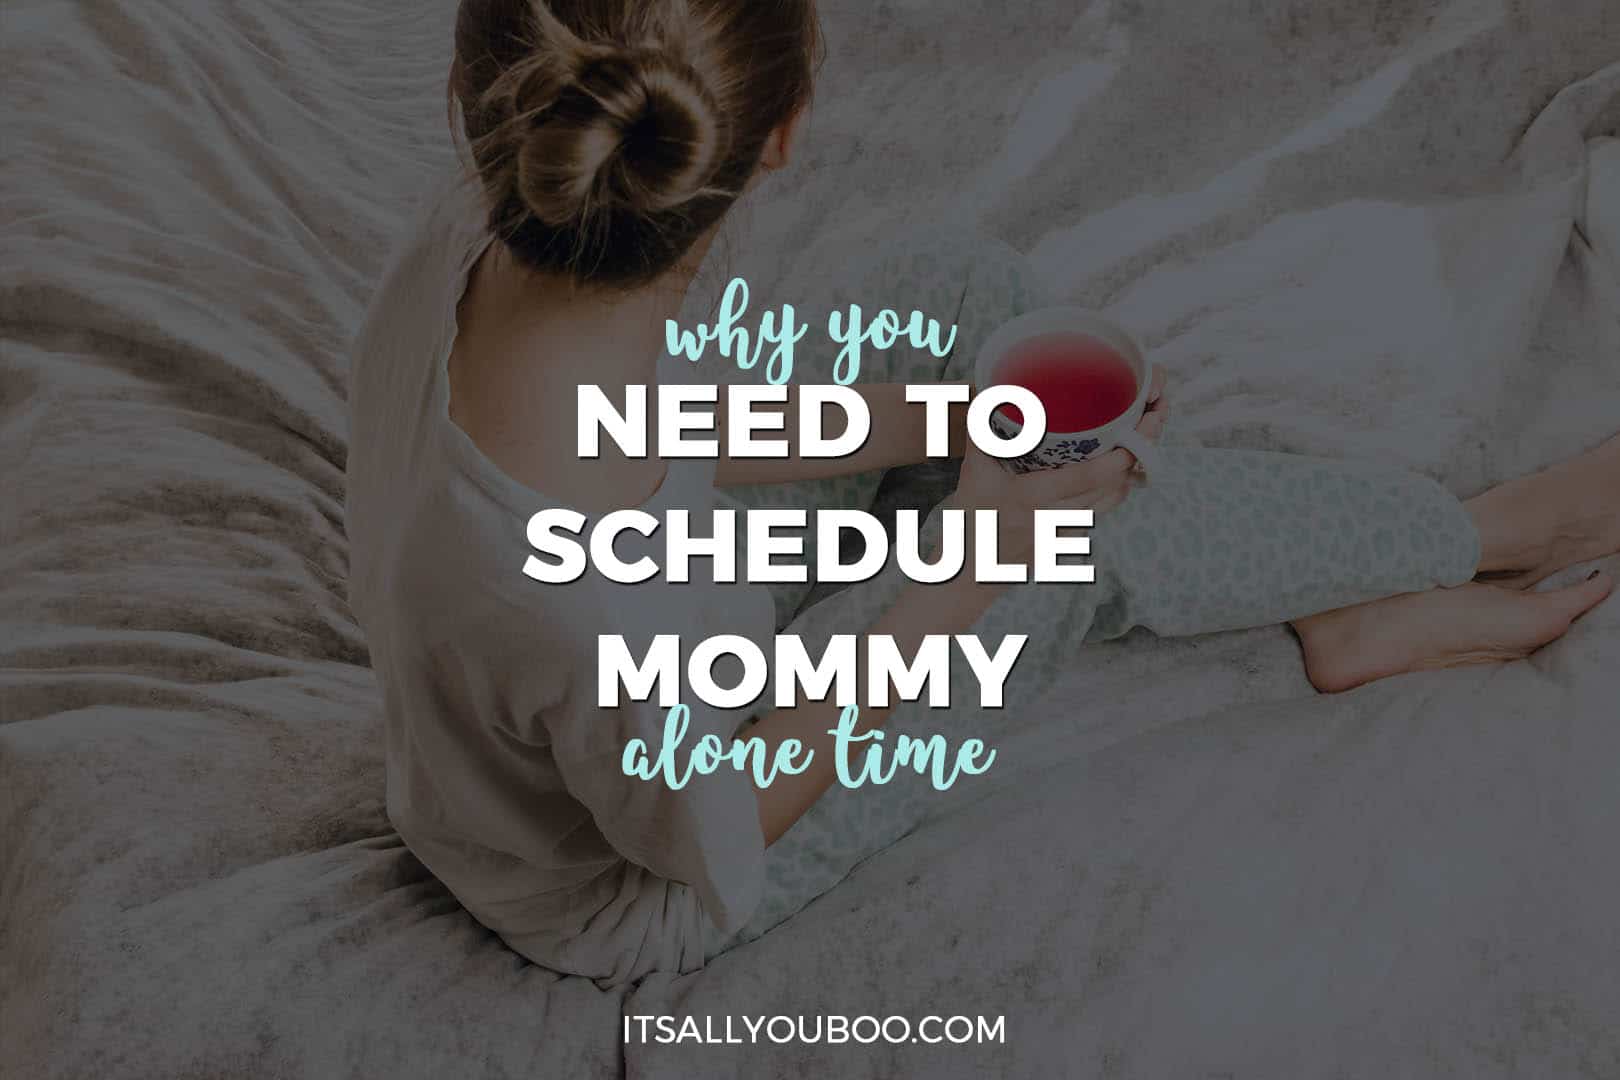 Why You Need to Schedule Mommy Alone Time